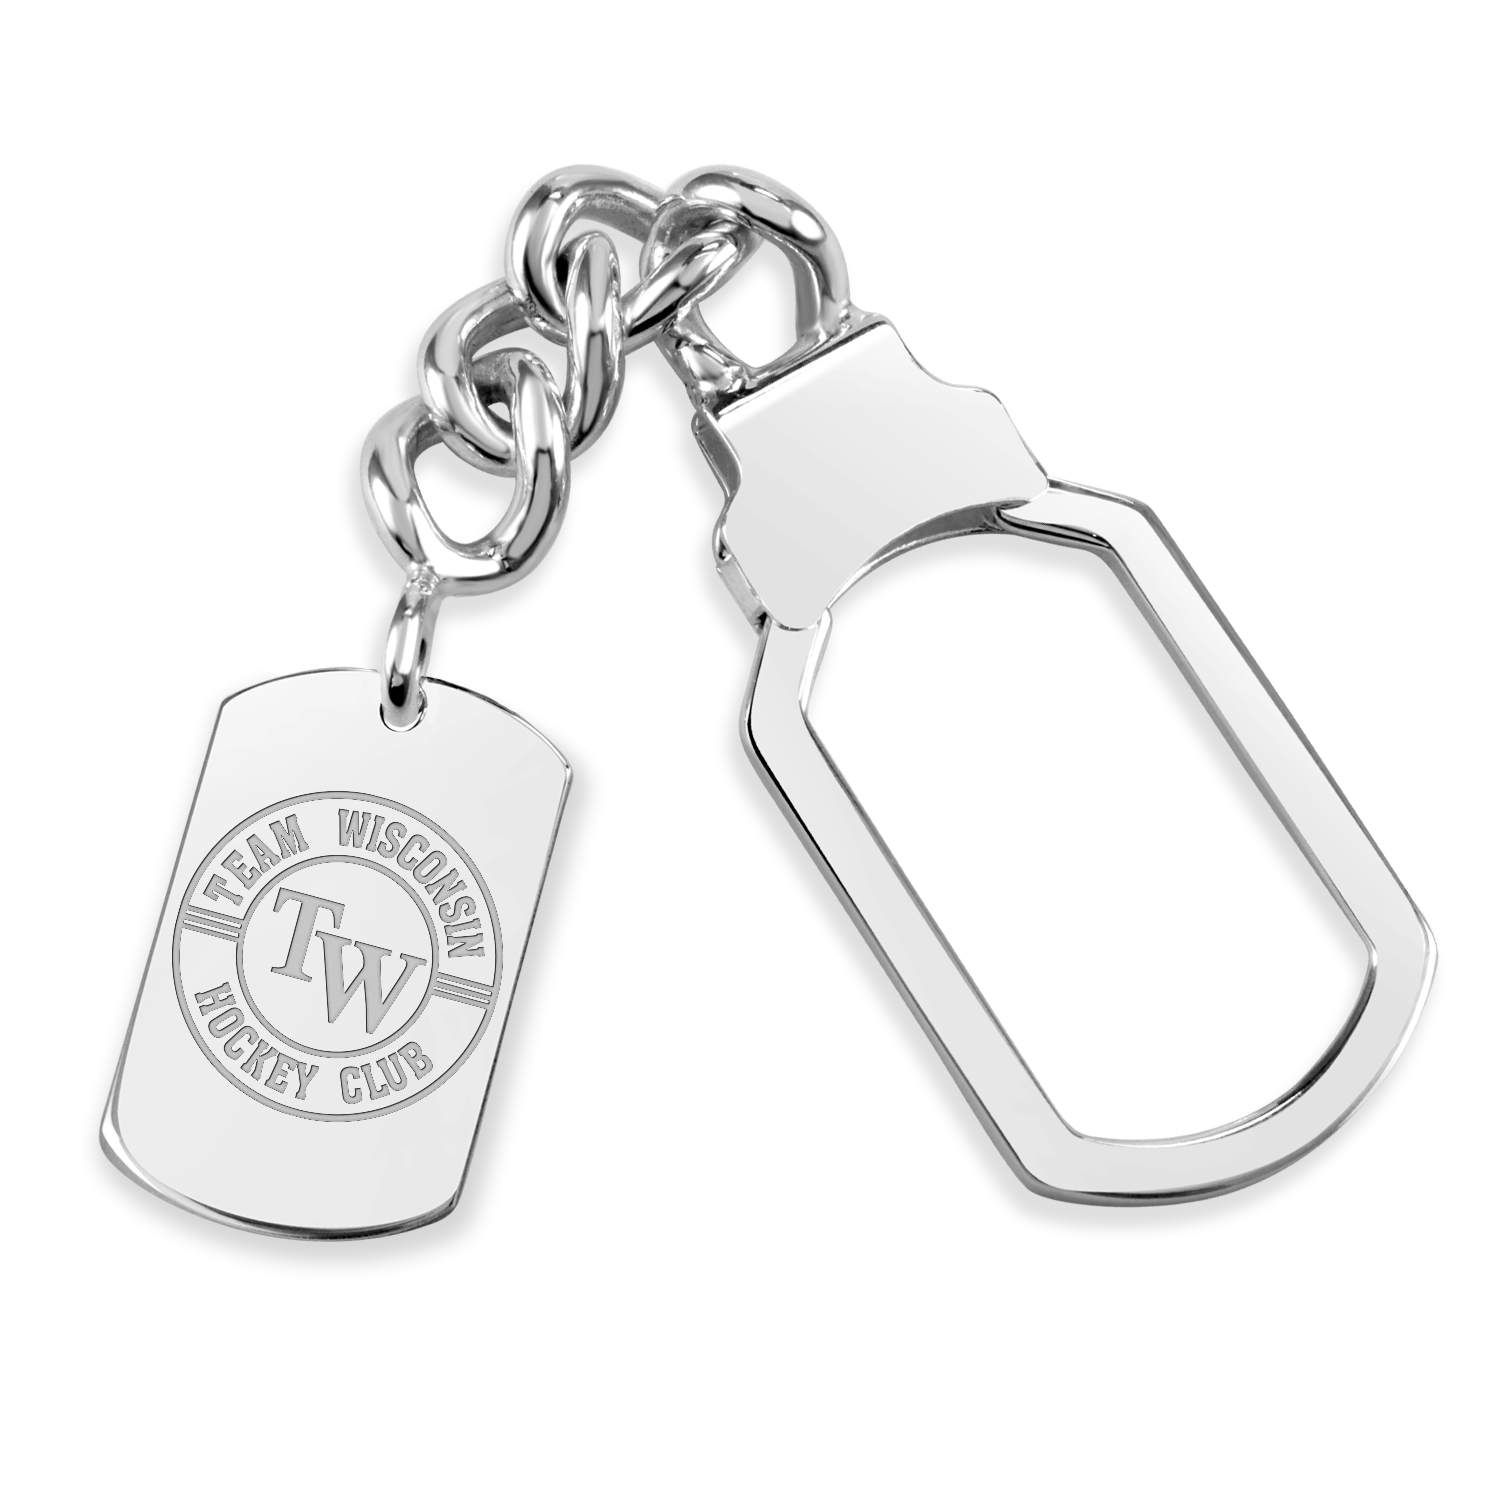 Team Wisconsin Tag Tension Key Chain